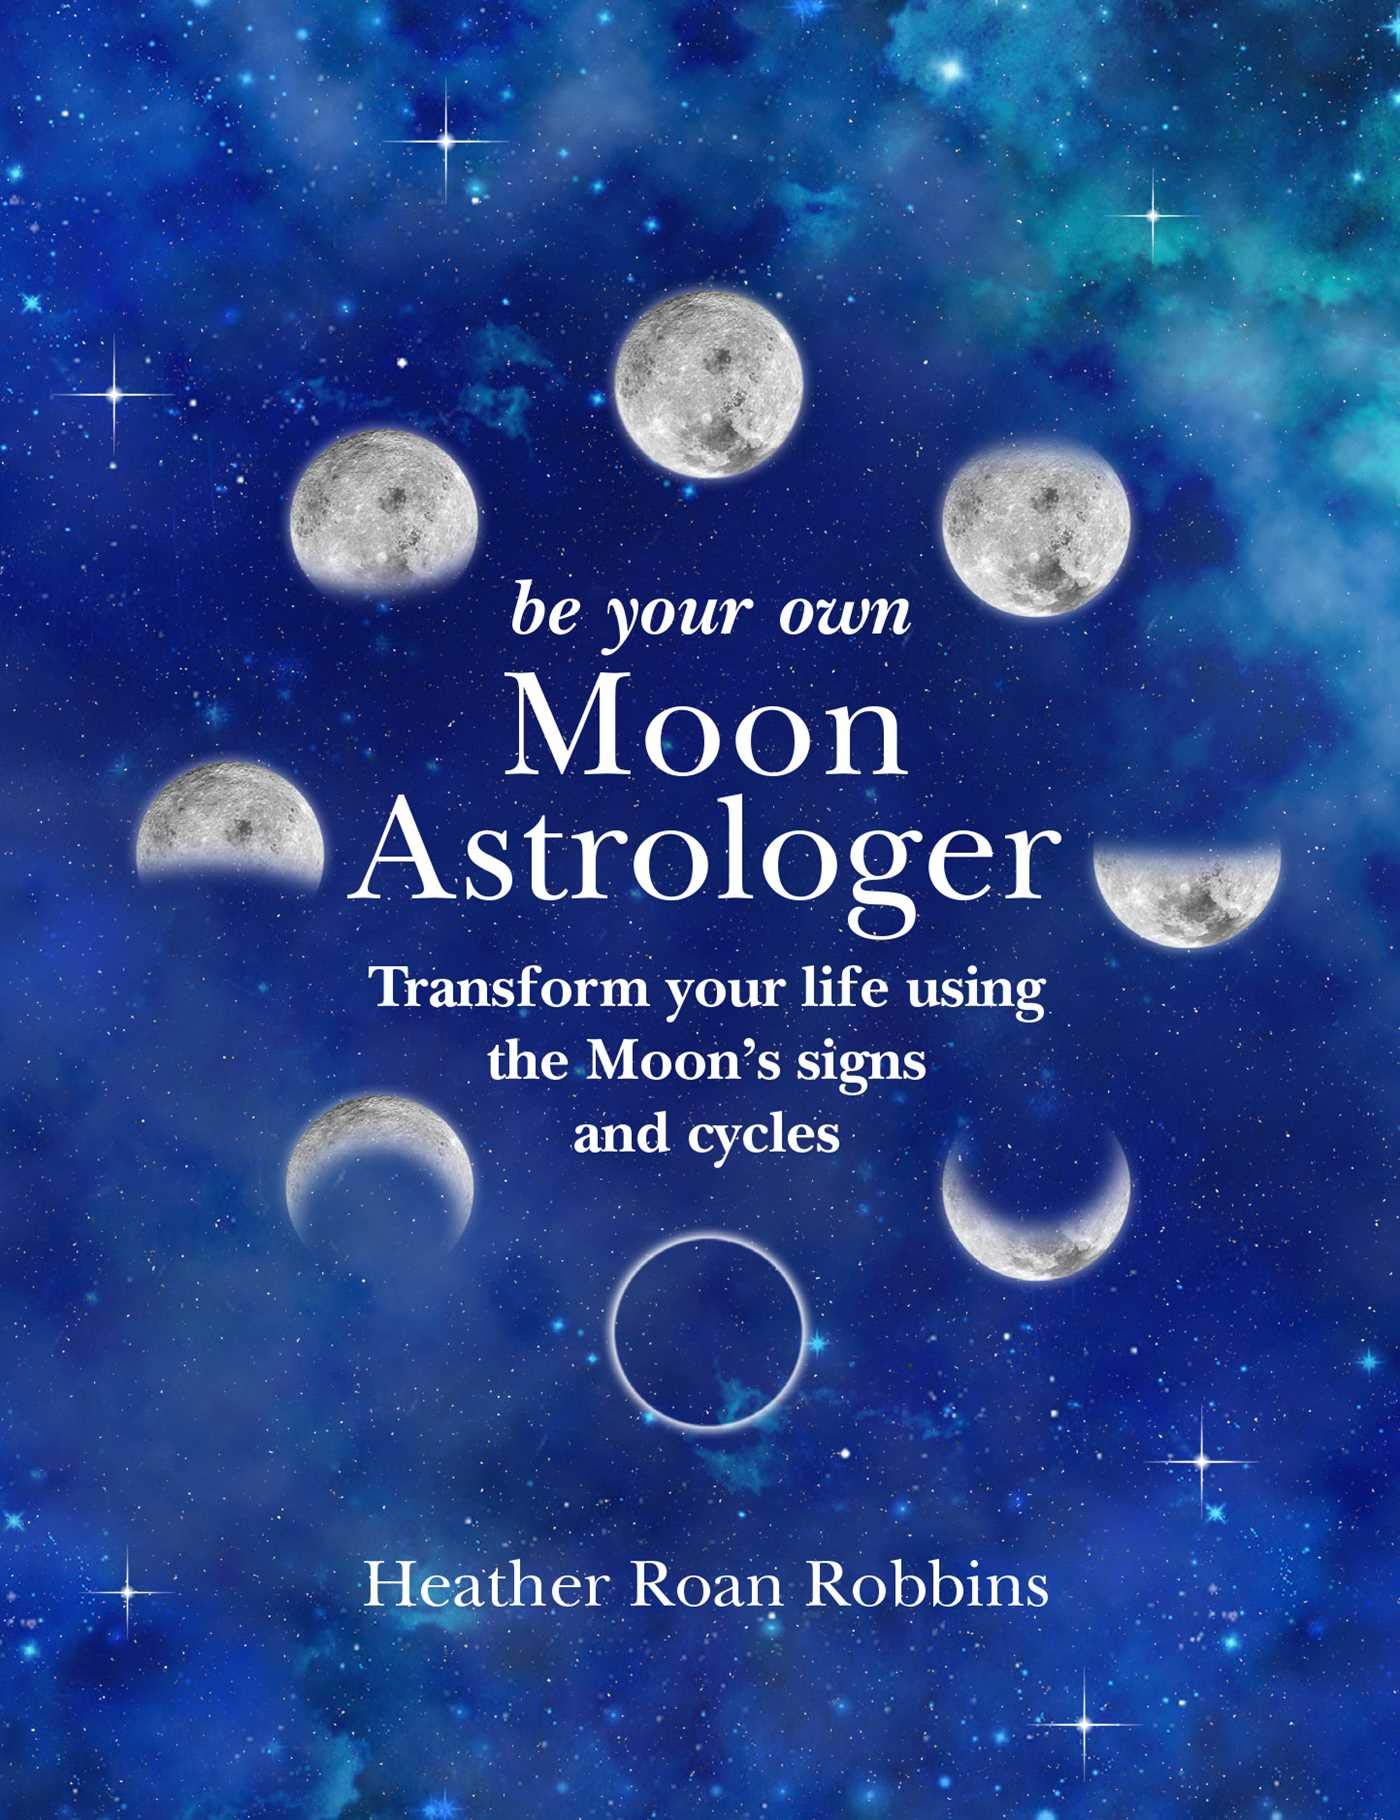 Be Your Own Moon Astrologer - Divine Clarity